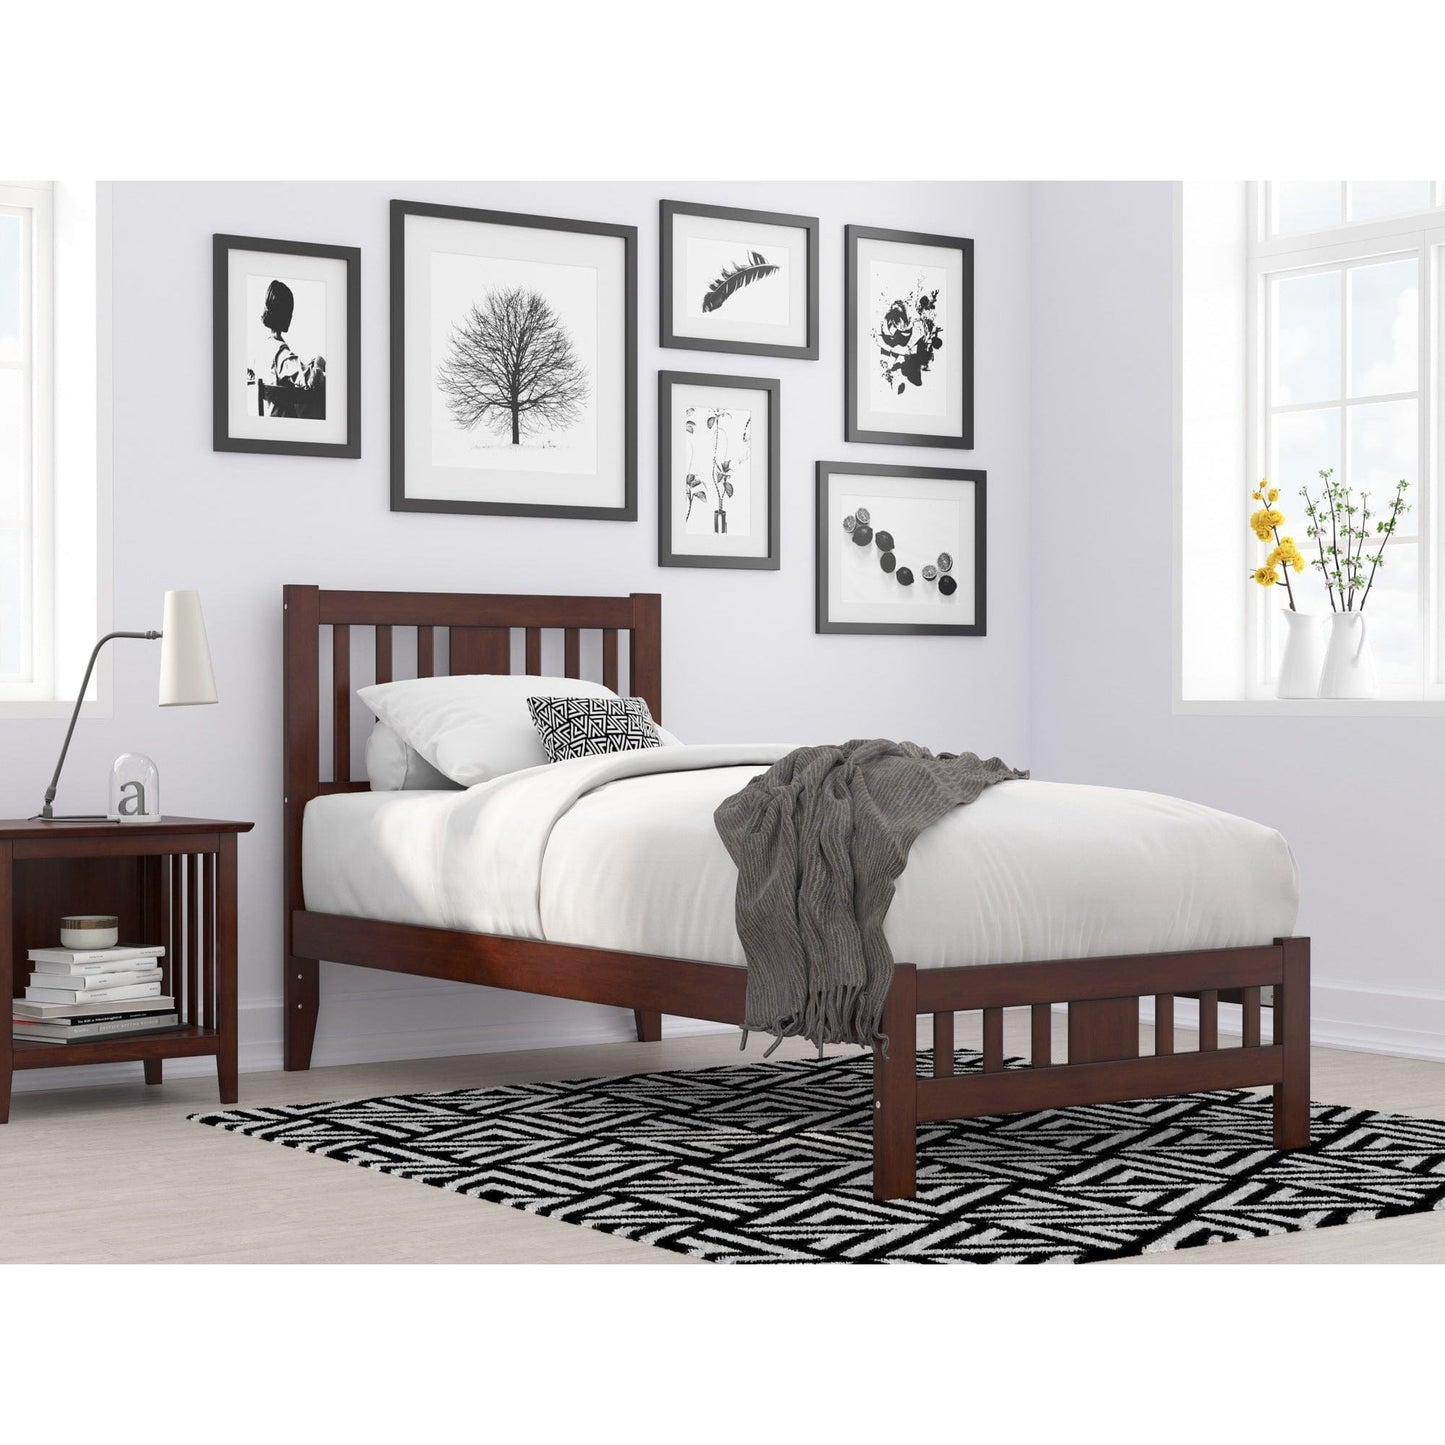 AFI Furnishings Tahoe Twin Extra Long Bed with Footboard in Walnut AG8960014